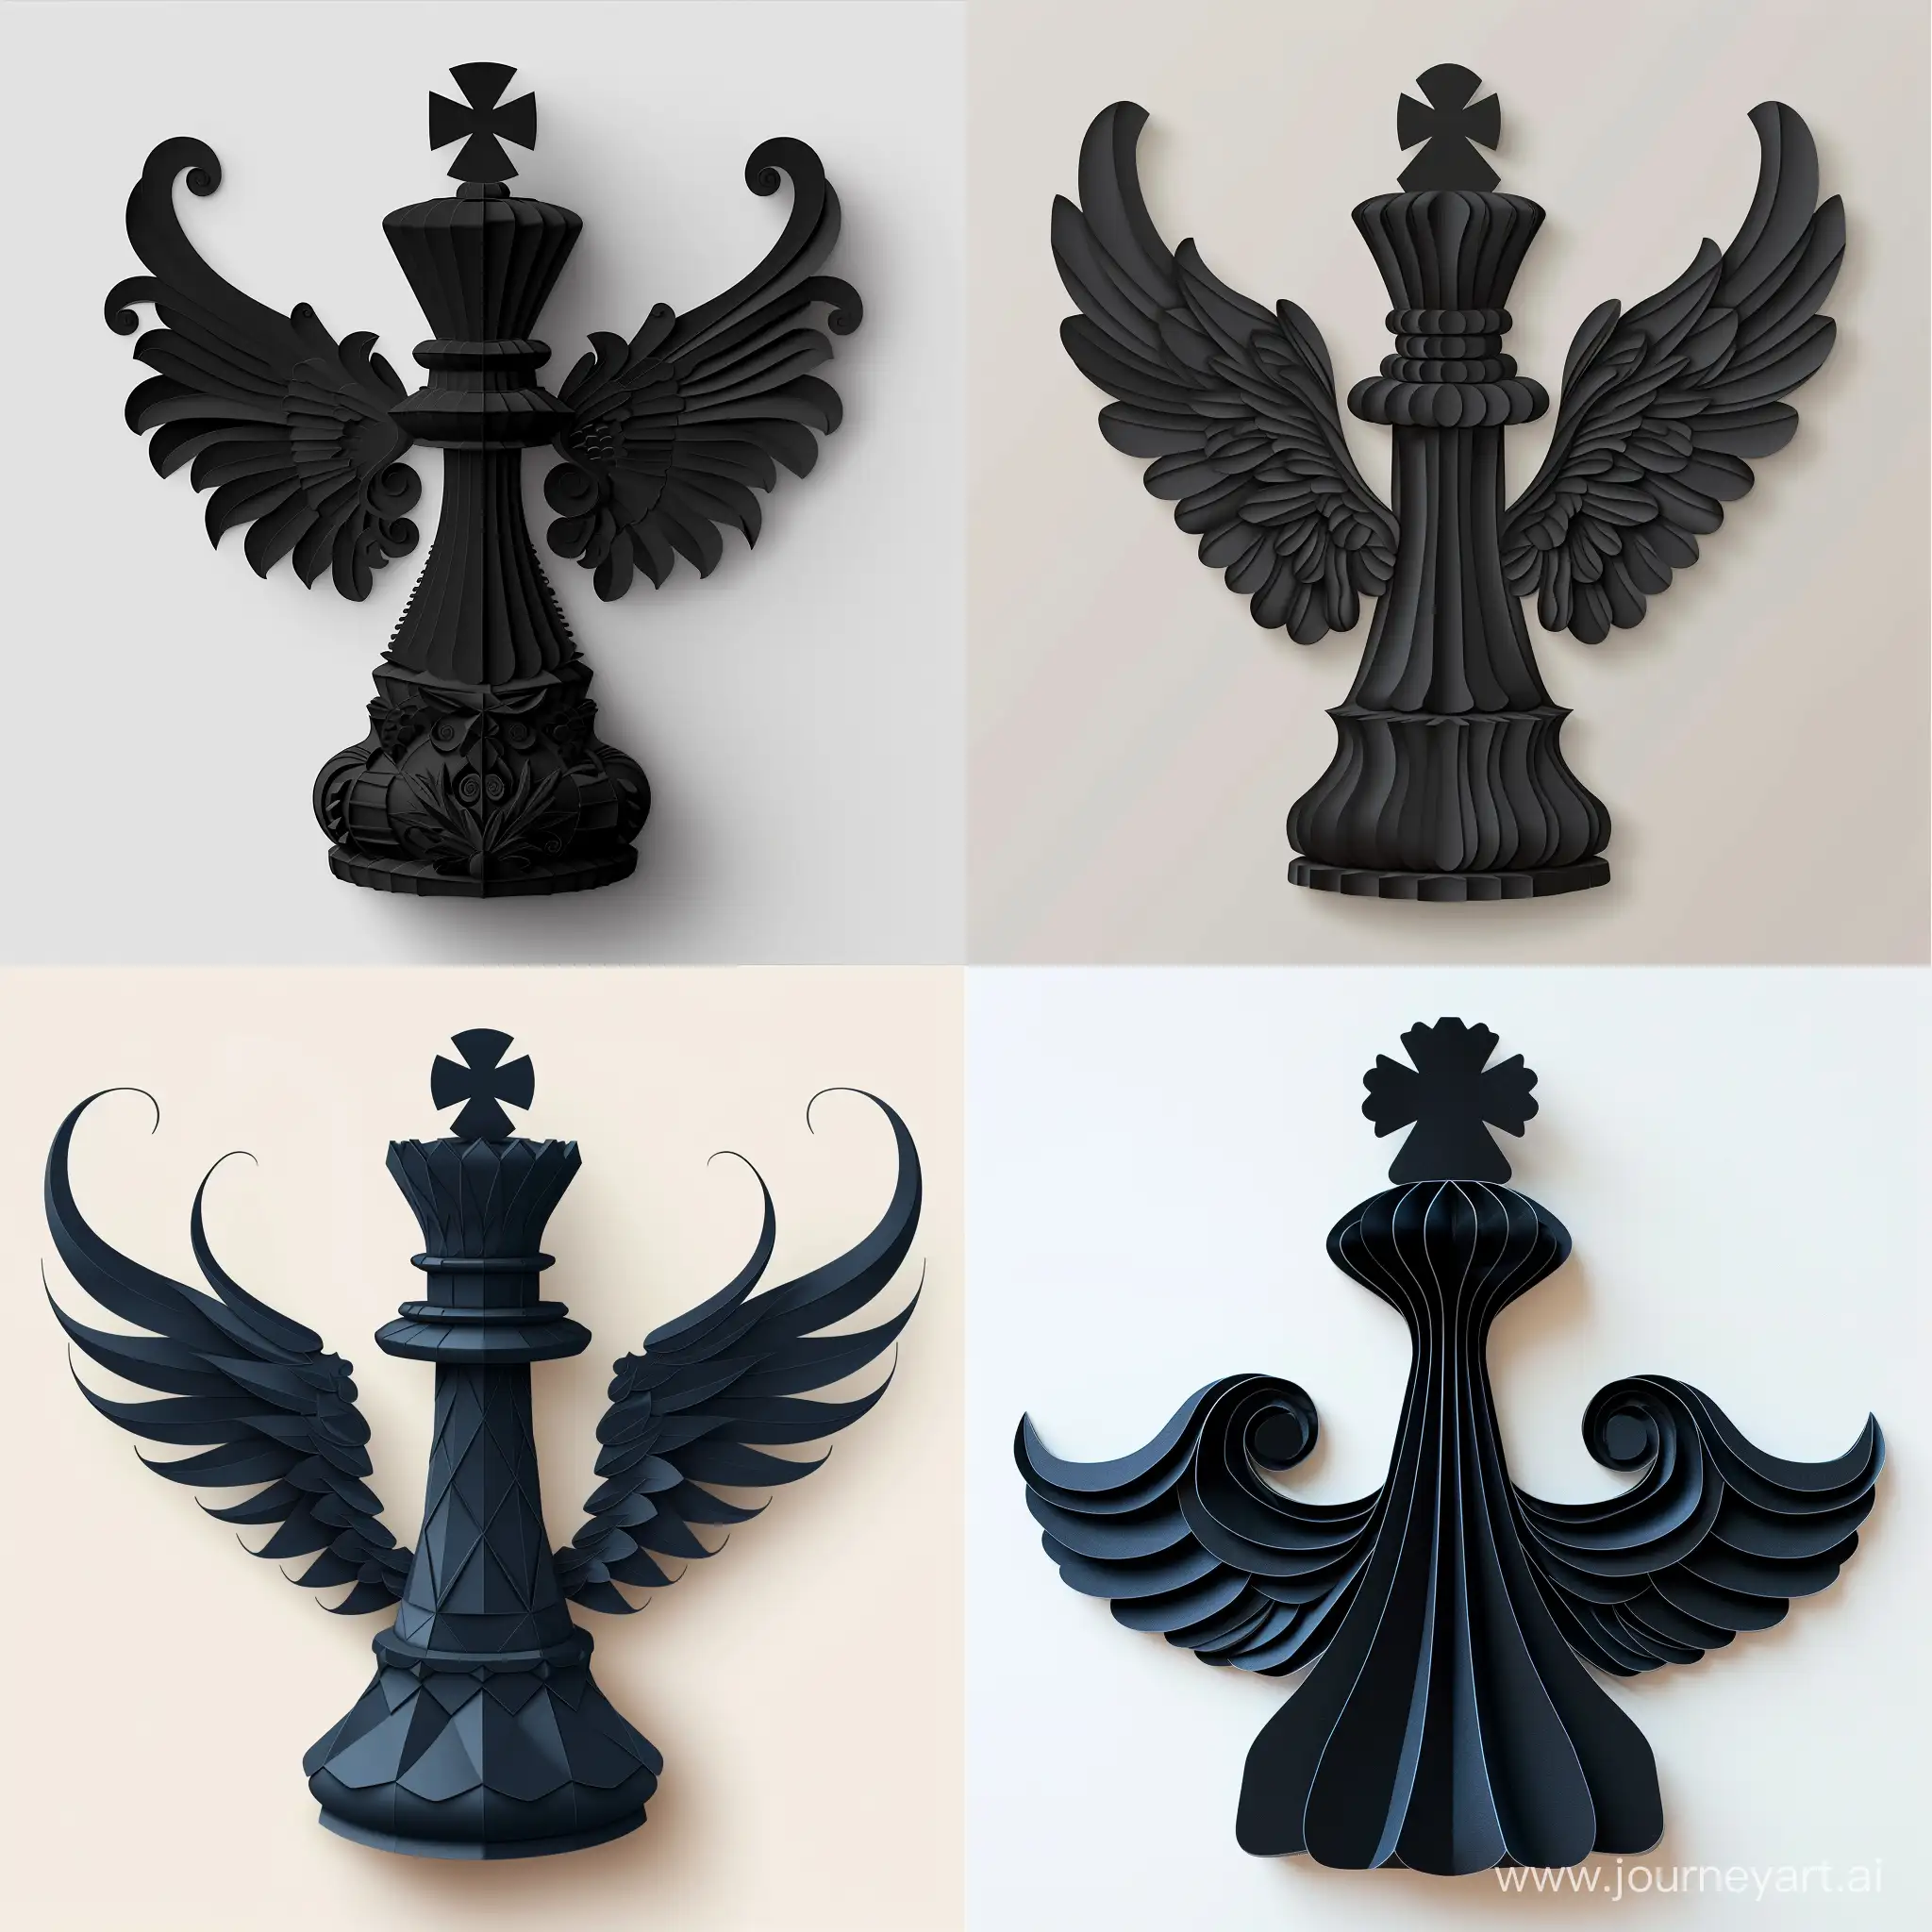 Cut paper art of black pawn with a wings, in vector style, high quality details